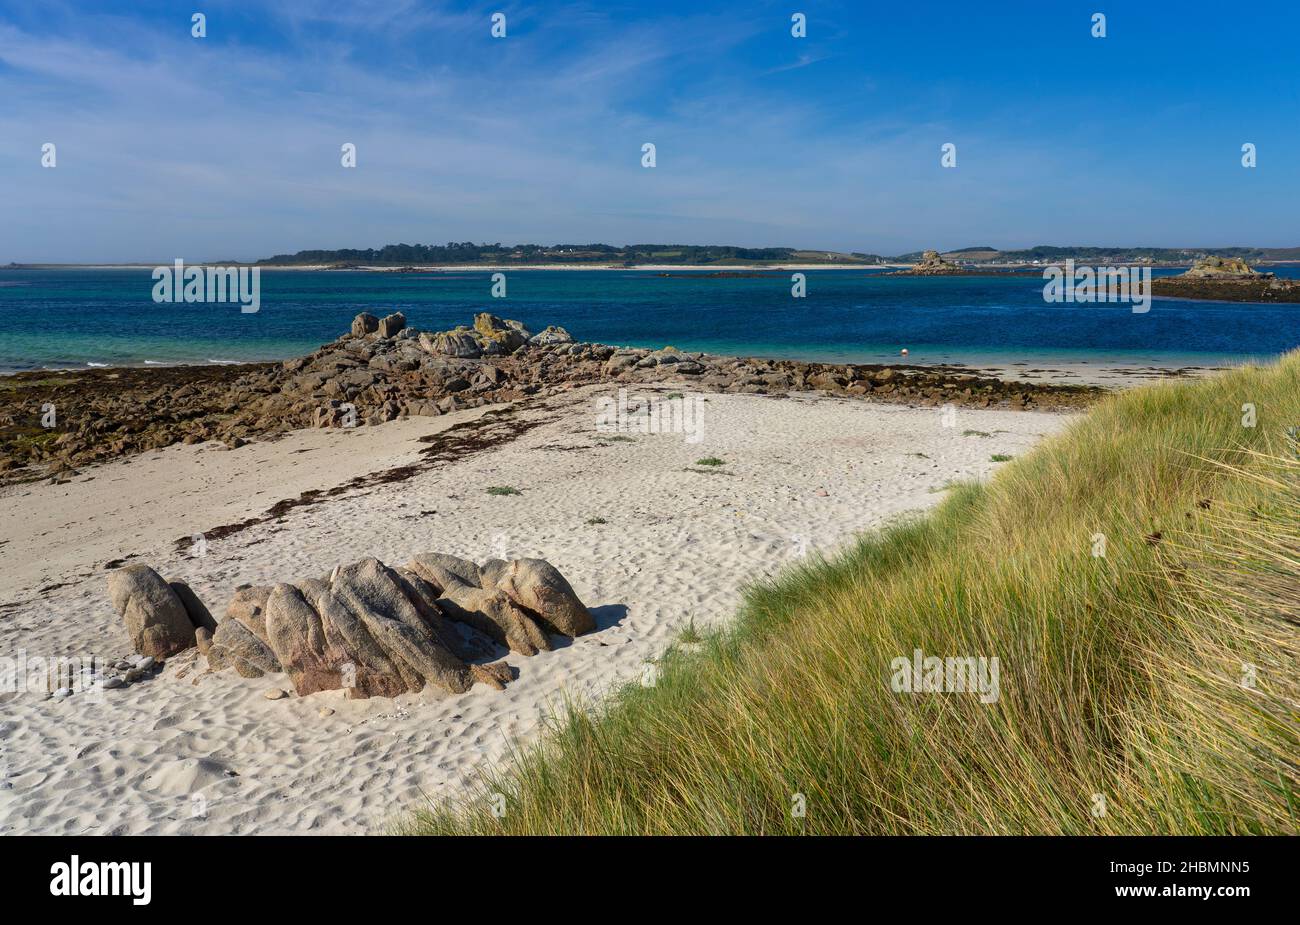 St.Martins, Isole di Scilly, Inghilterra Foto Stock